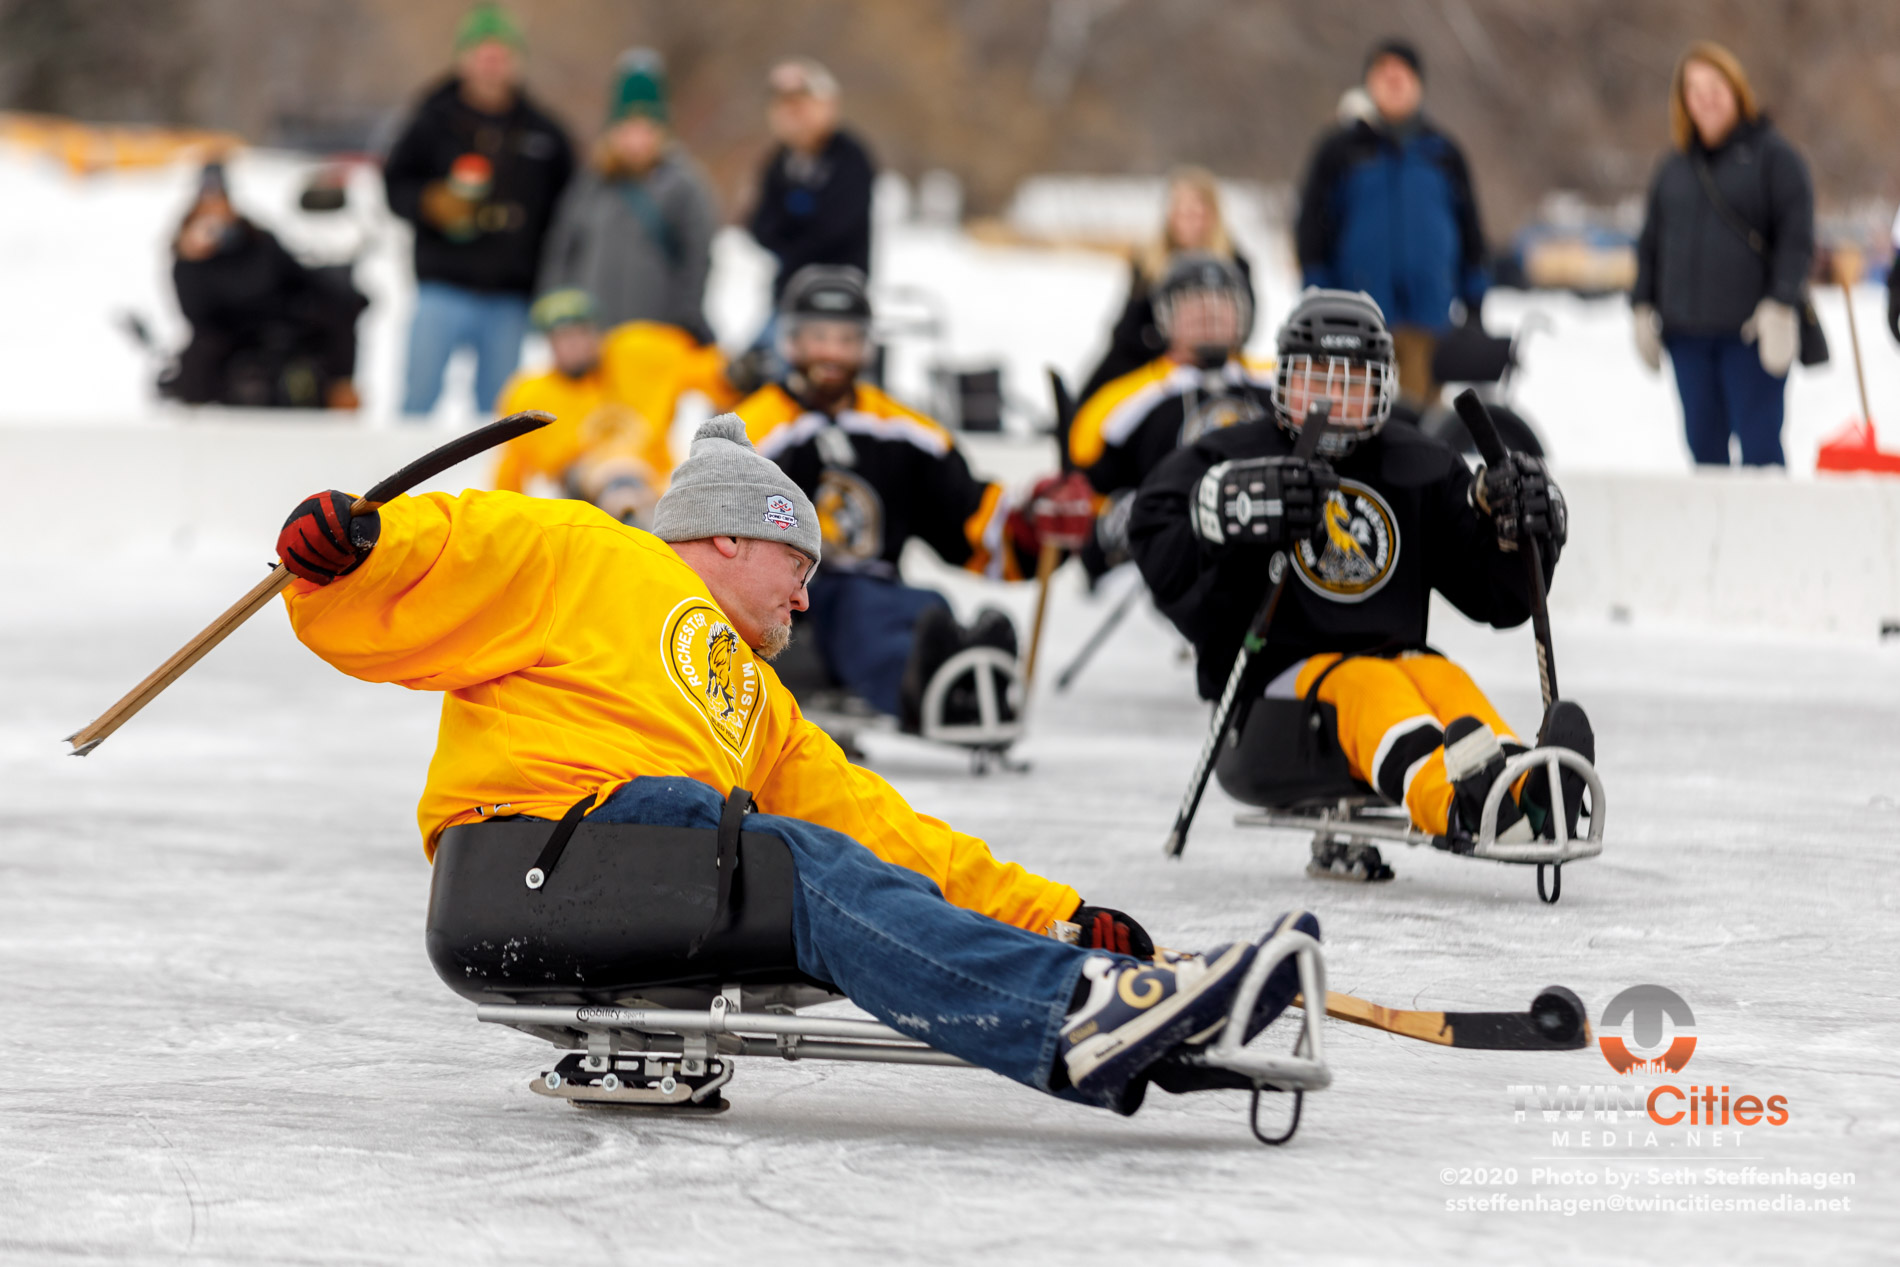 January 26, 2020 - Minneapolis, Minnesota, United States - Rochester Mustangs Gold take on Rochester Mustangs Black in the sled hockey championship game during the U.S. Pond Hockey Championships on Lake Nokomis. 

(Photo by Seth Steffenhagen/Steffenhagen Photography)